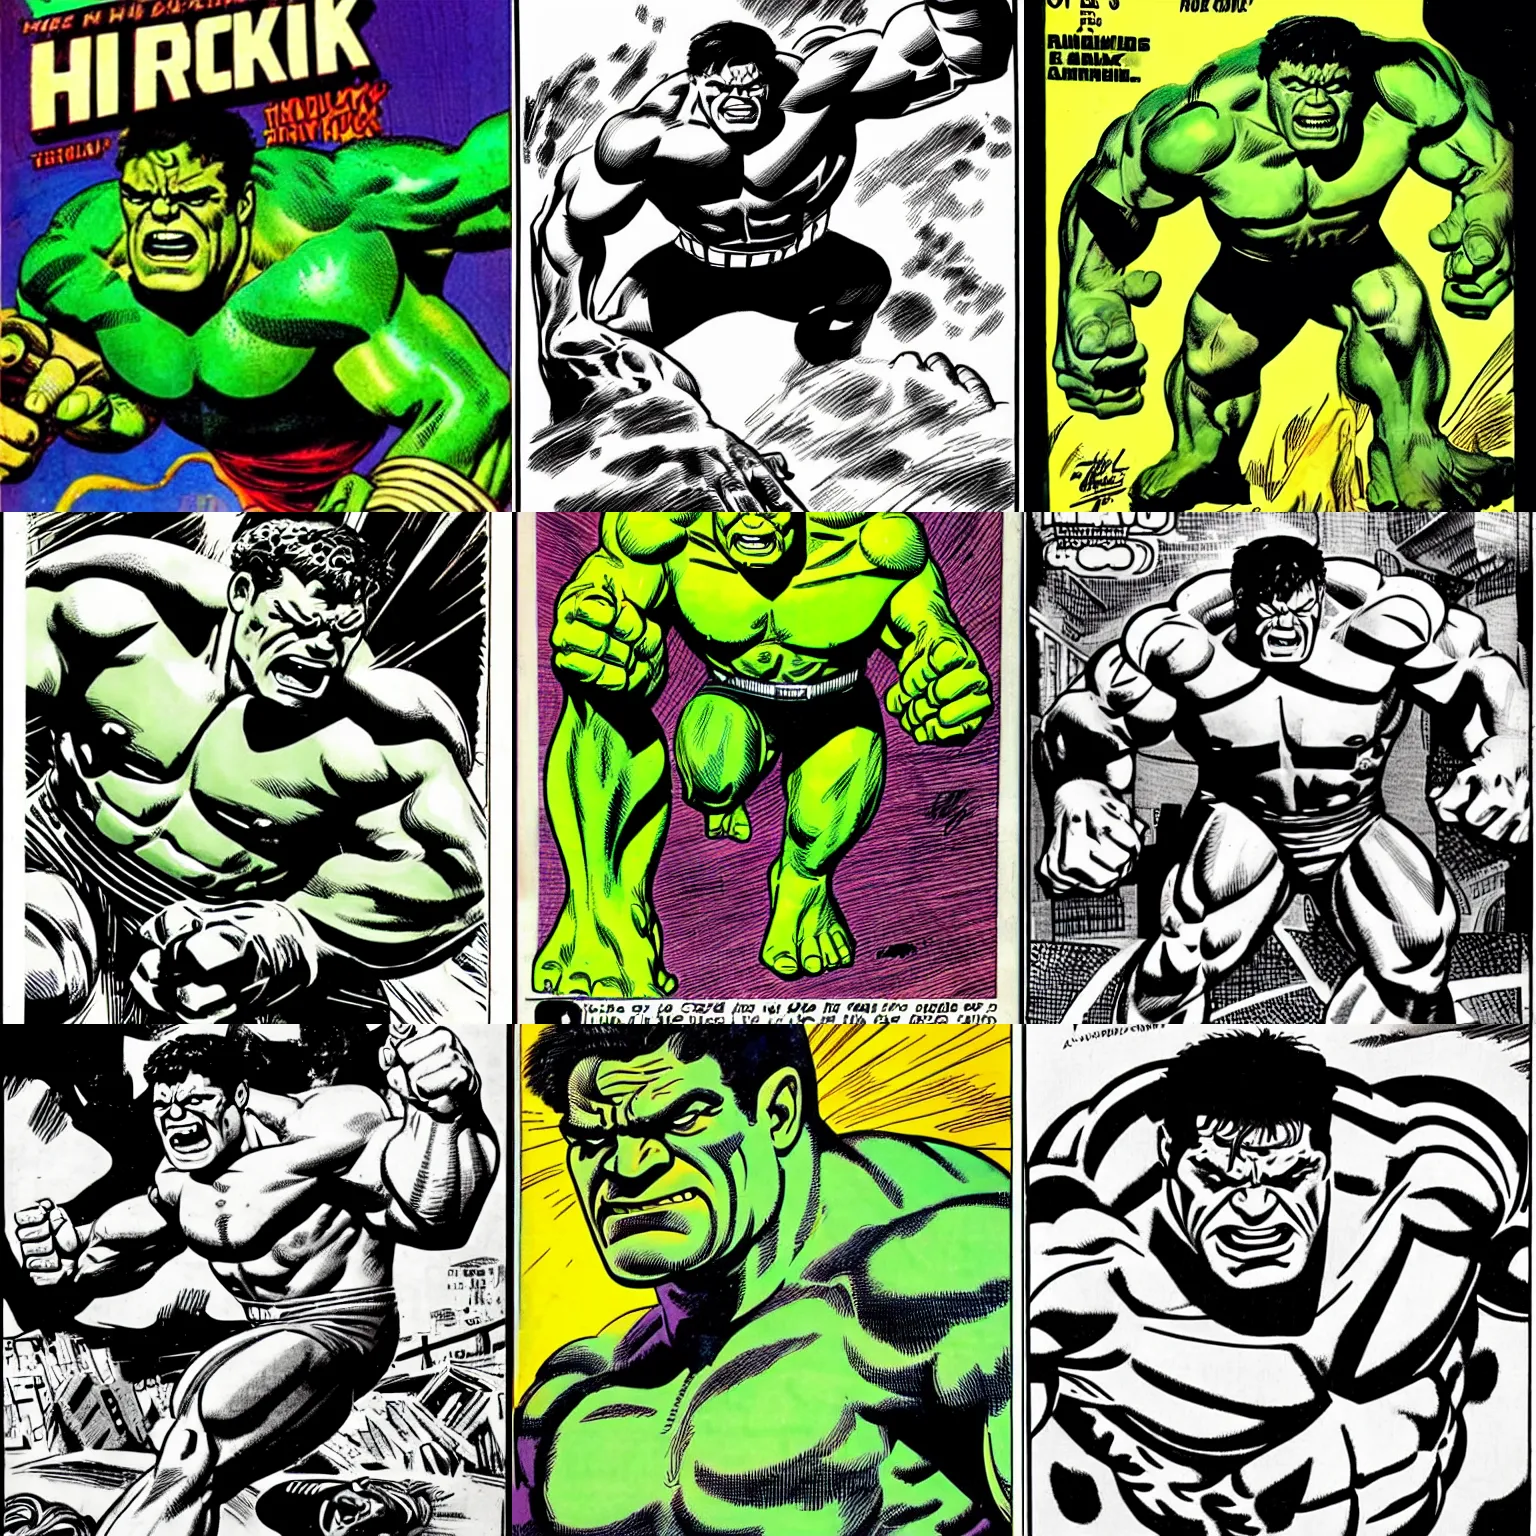 Prompt: by jack kirby comic book macro face of hulk